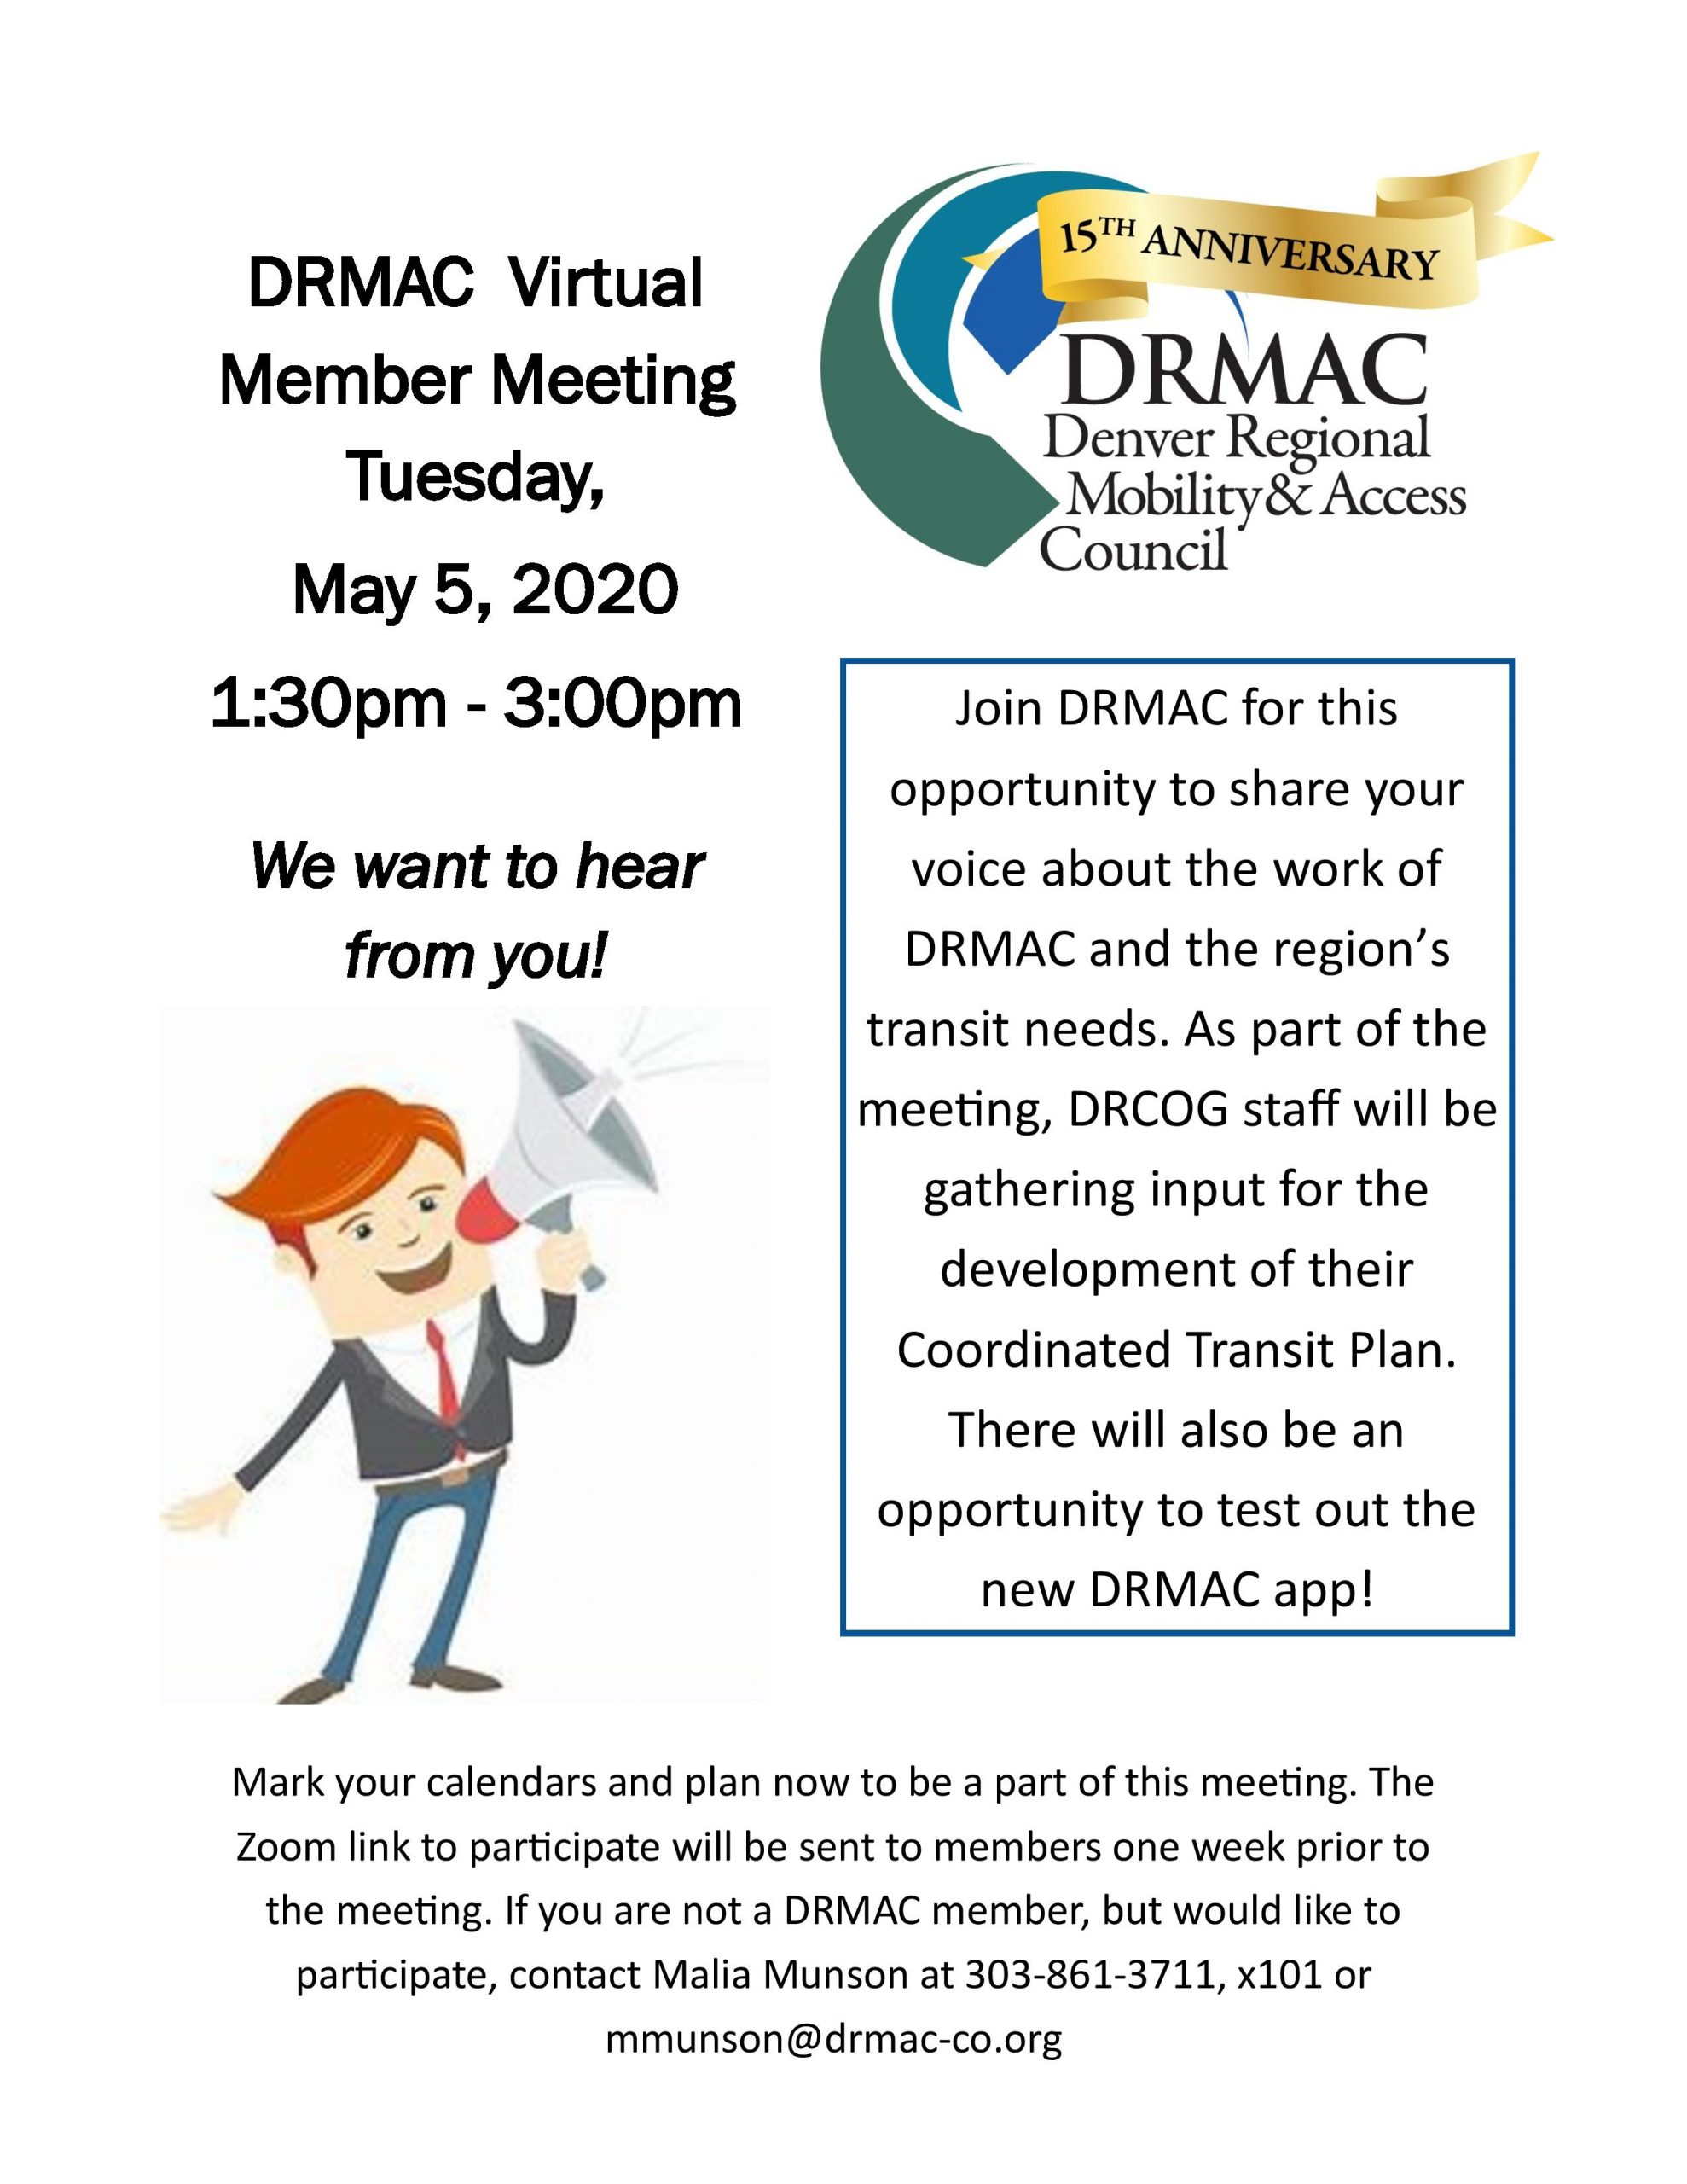 Member meeting - May 5th - 1:30 to 3:00pm - contact Malia: mmunson@drmac-co.org